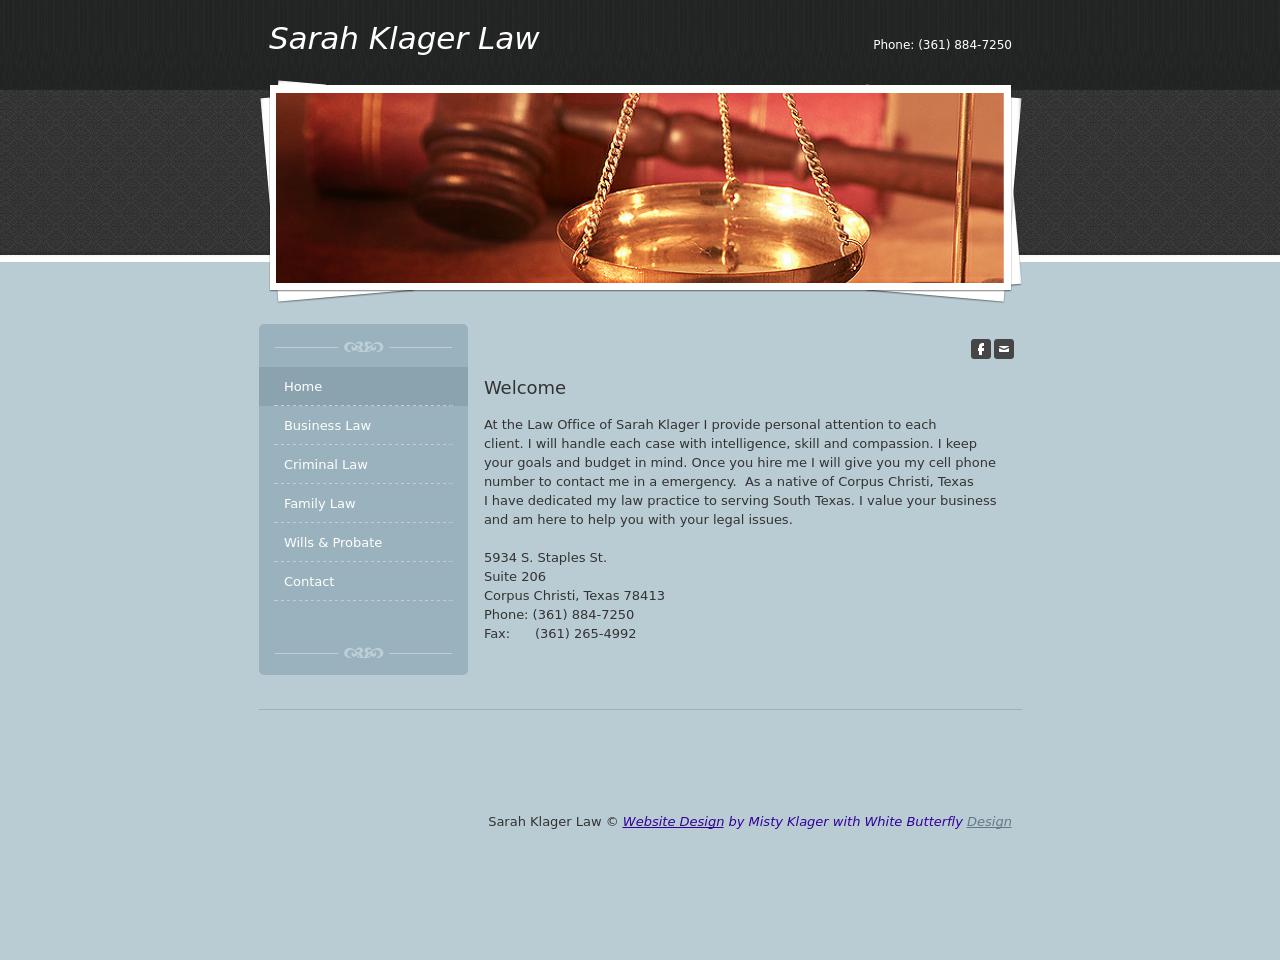 Law Office of Sarah Klager - Corpus Christi TX Lawyers